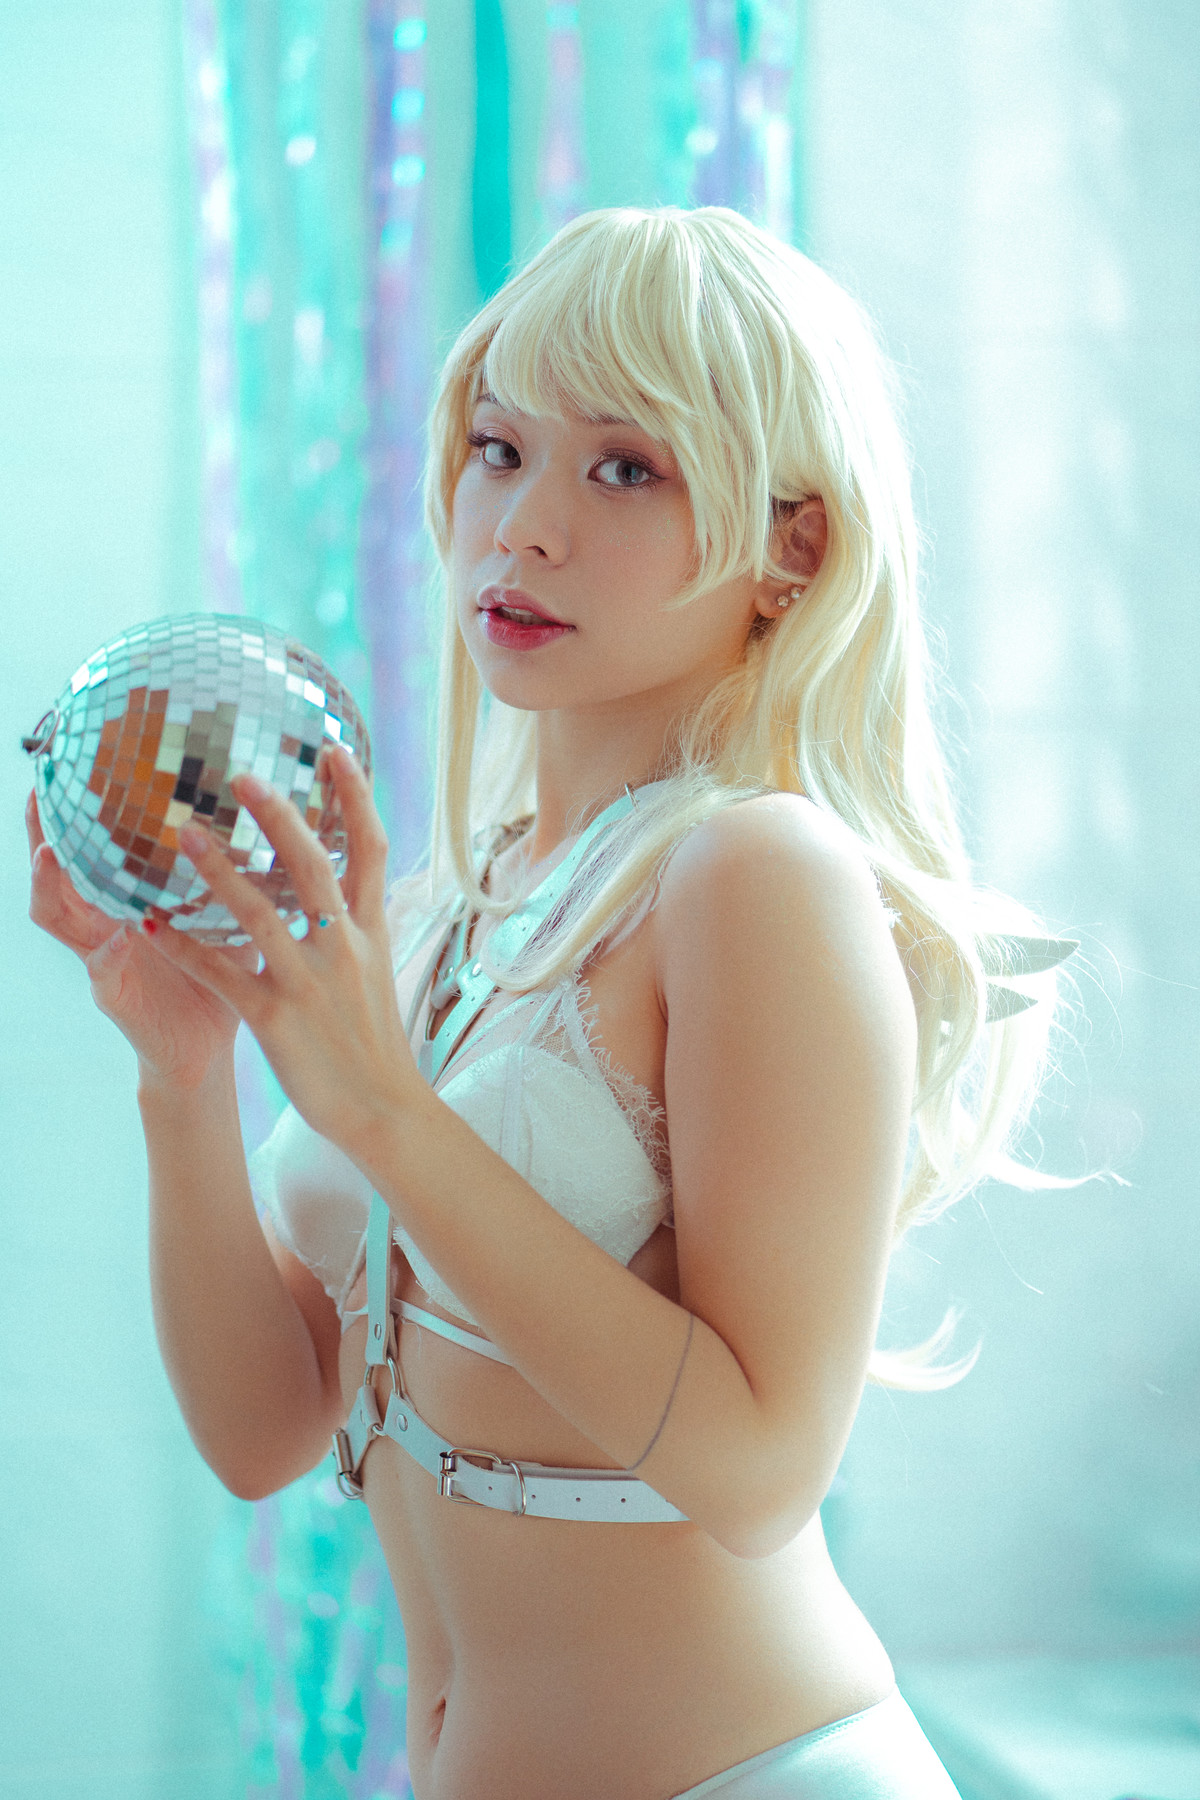 Kuromelo 黒メル, [DCP-snaps] Tricia White Feather Set.01